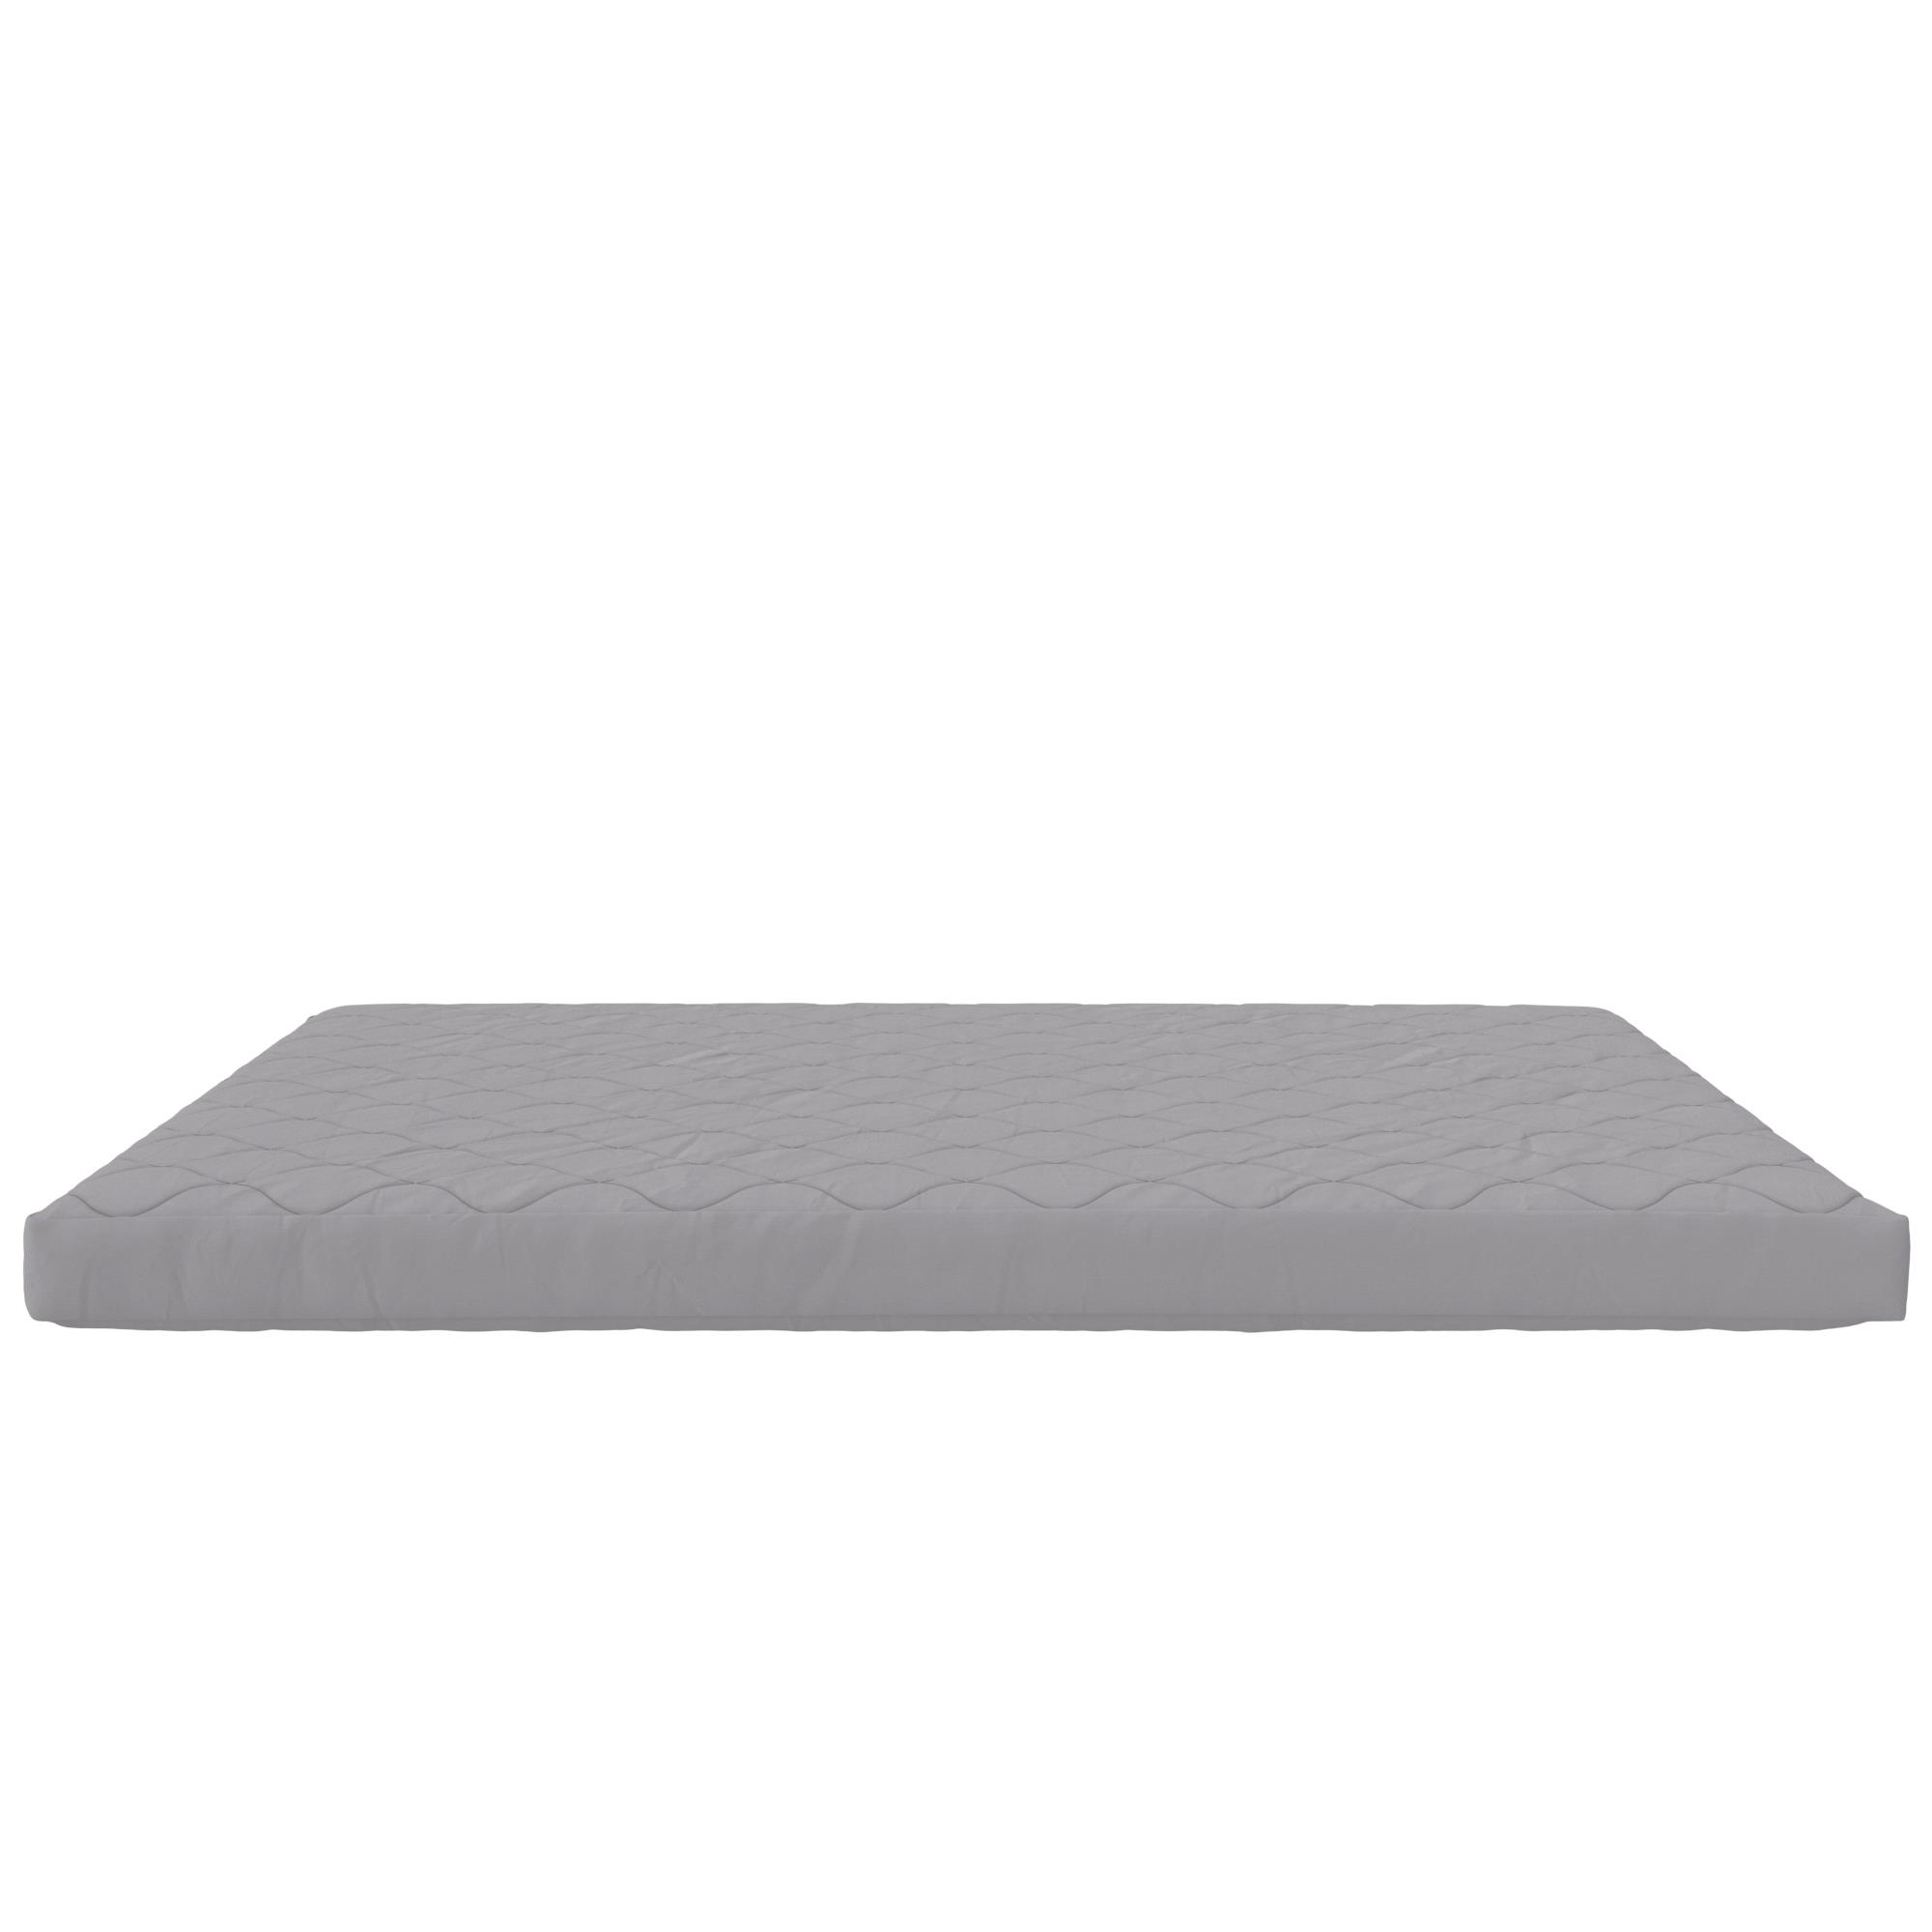 DHP Value 6 Inch Thermobonded Polyester Filled Quilted Top Bunk Bed Mattress, Full, Gray - image 4 of 8